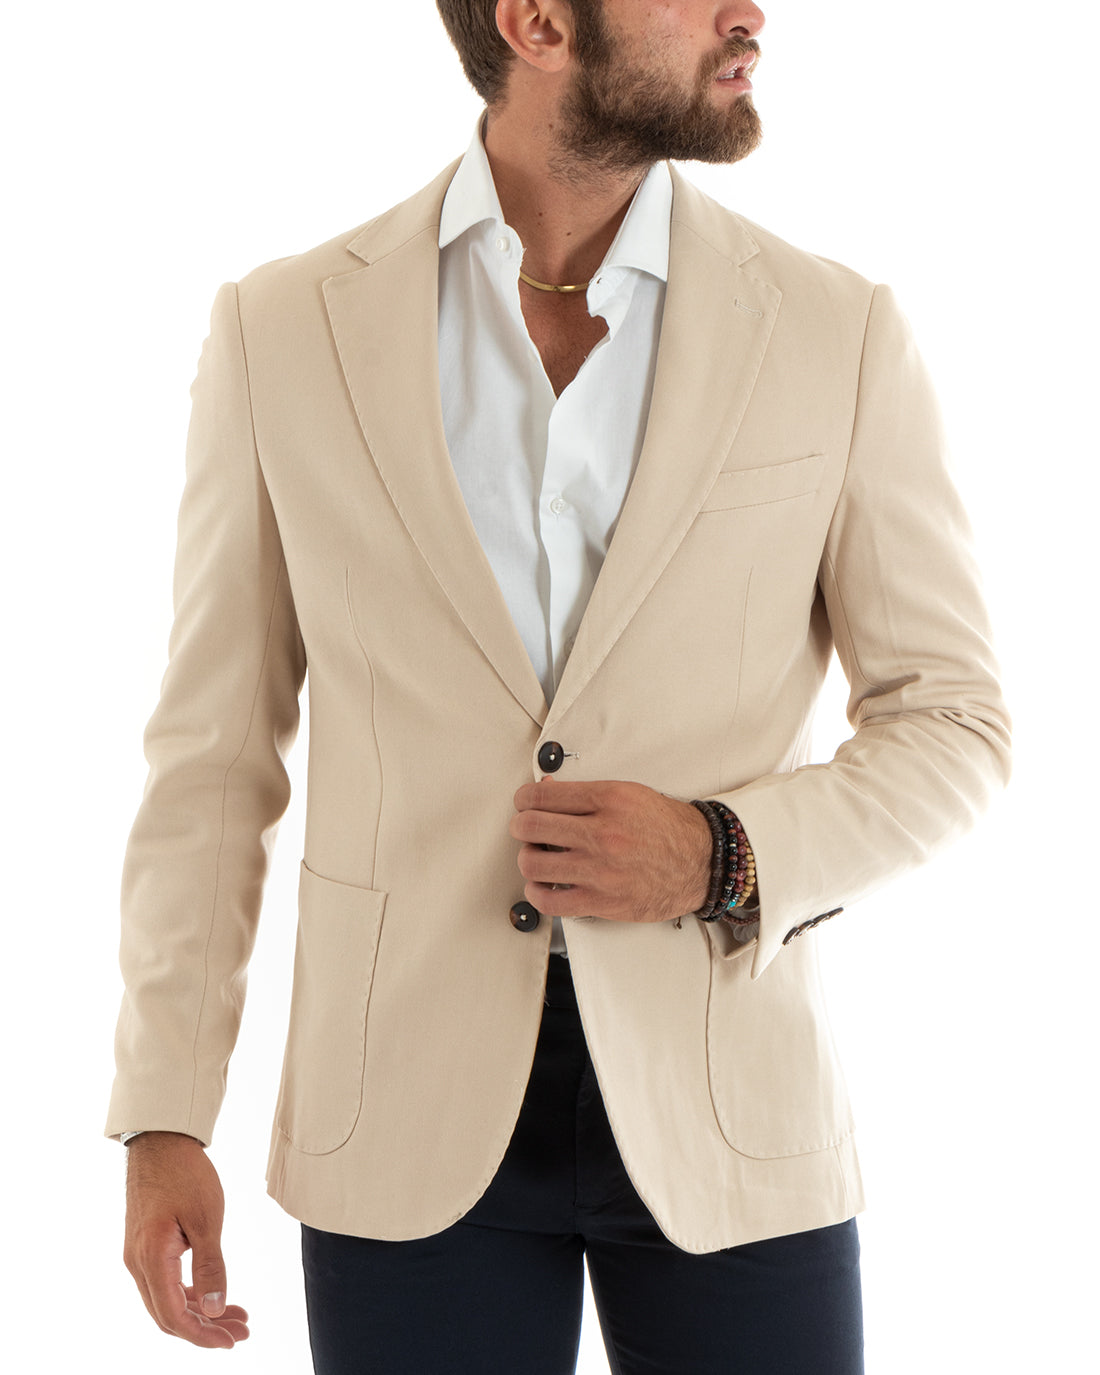 Men's Jacket Basic Blazer Single-breasted Classic Lapel Stitched Solid Color Beige Casual GIOSAL-G3086A